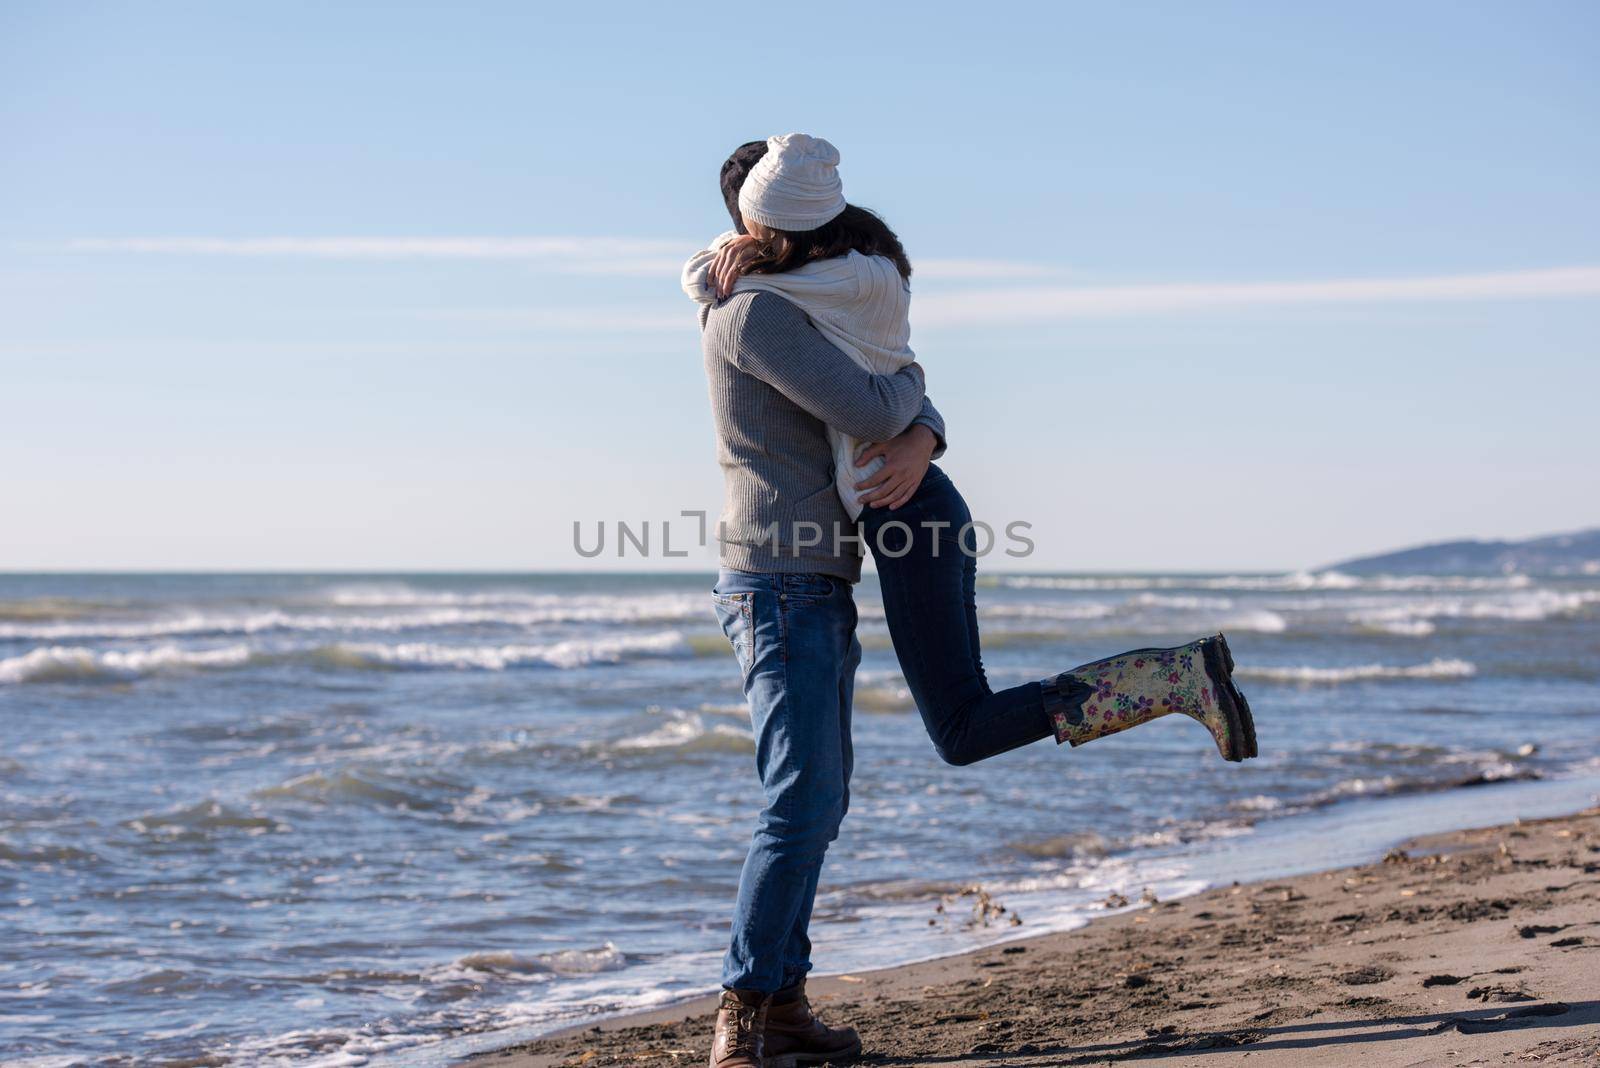 Young couple having fun walking and hugging on beach during autumn sunny day